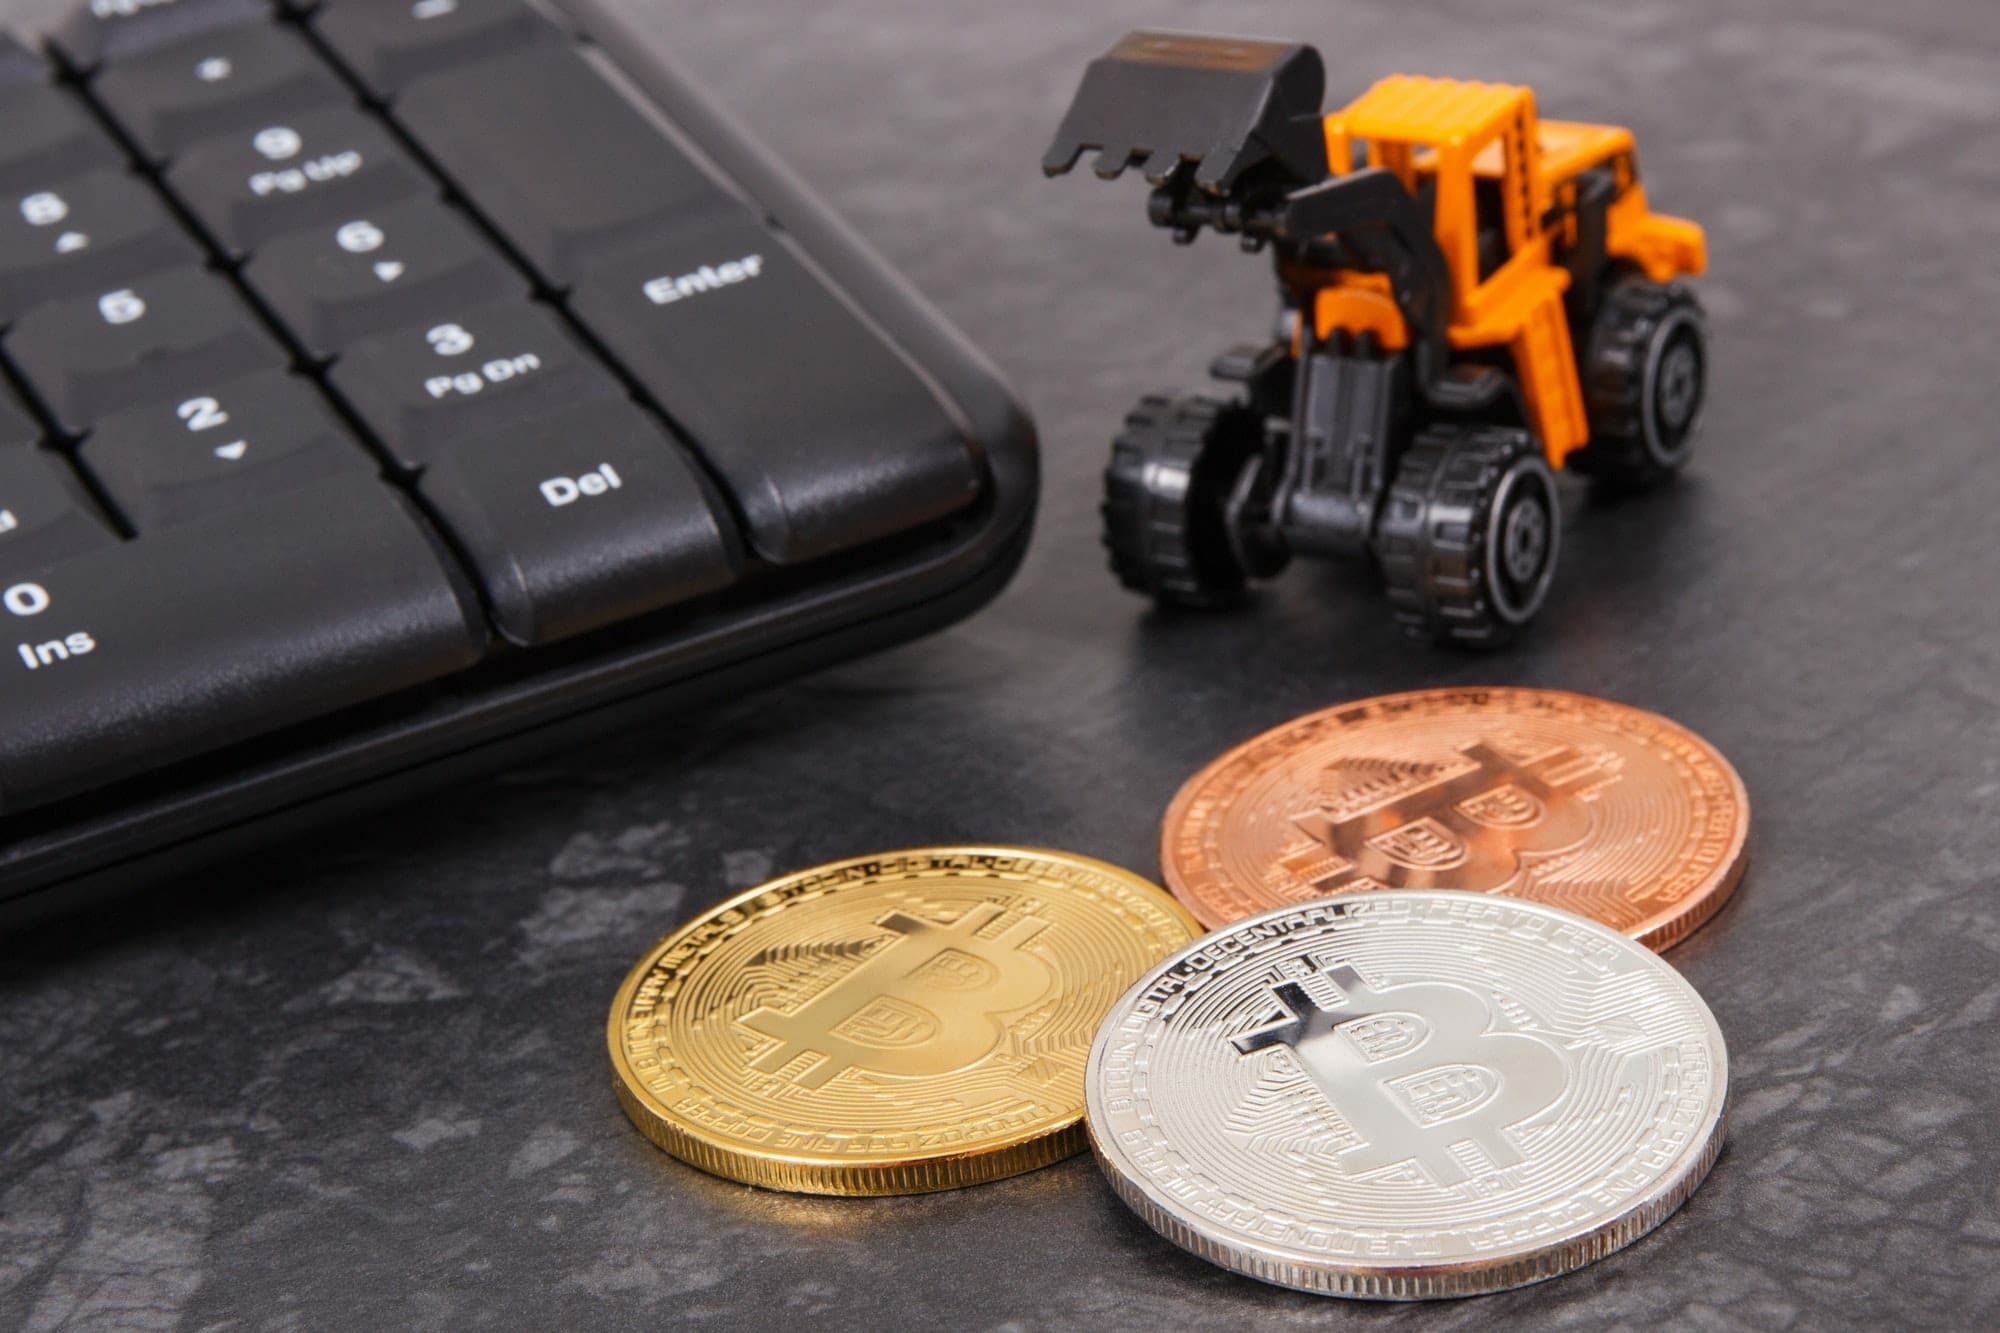 Bitcoins as symbol of electronic virtual money, miniature excavator and computer keyboard